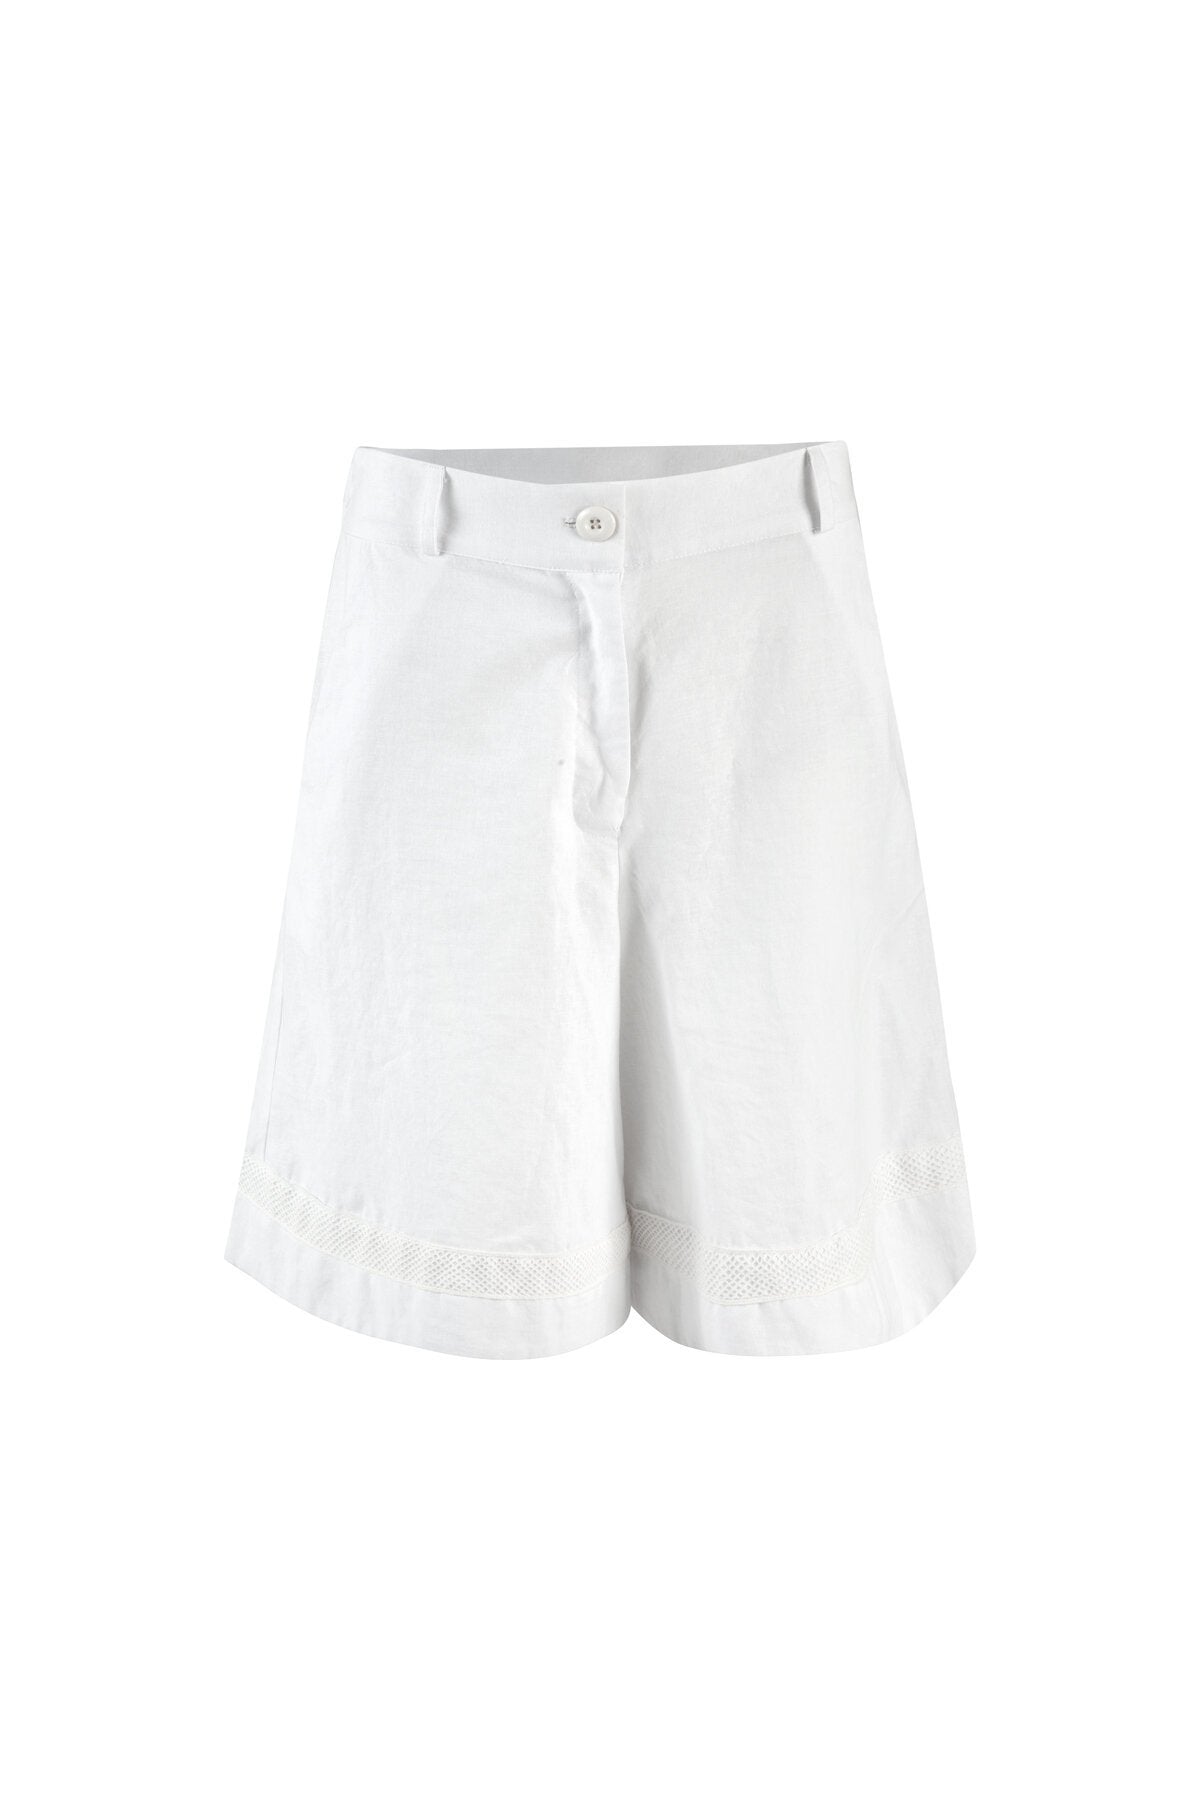 COMFY CAPRI Shorts - Curate : Trelise Cooper Online - SAVE IT FOR